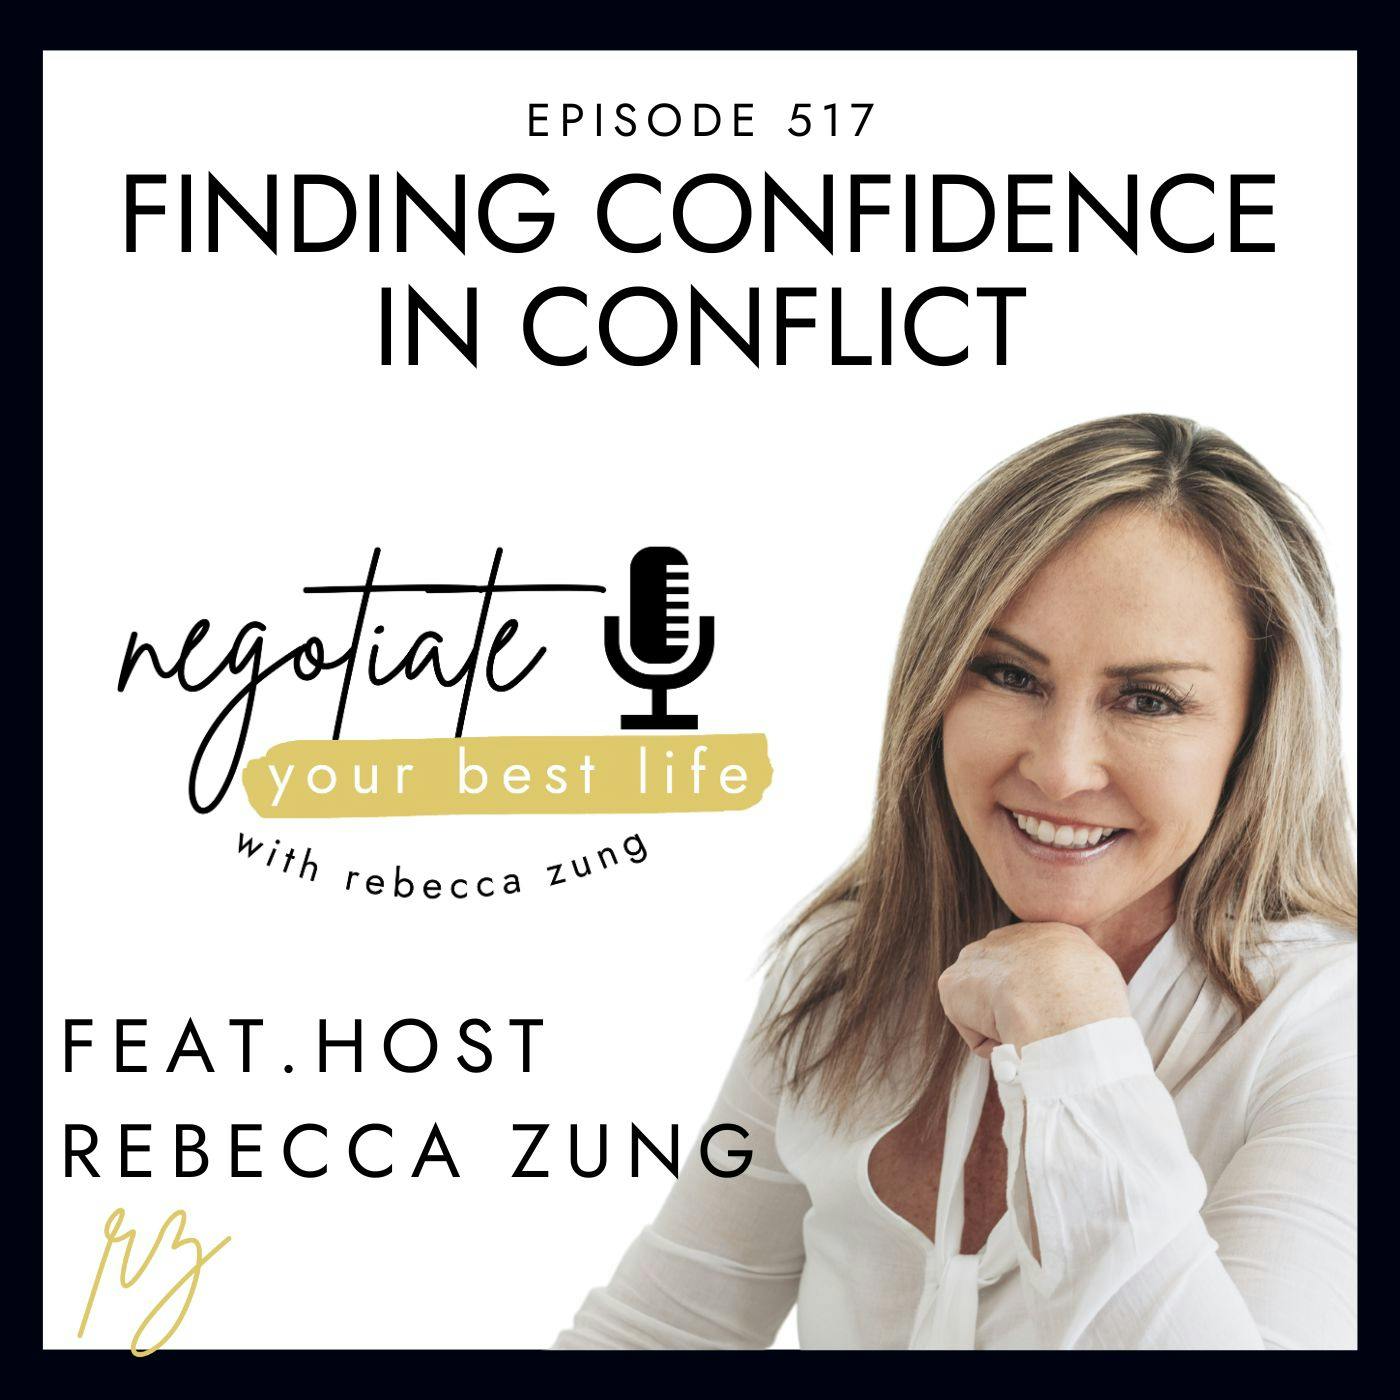 Finding Confidence in Conflict with Rebecca Zung on Negotiate Your Best Life #517